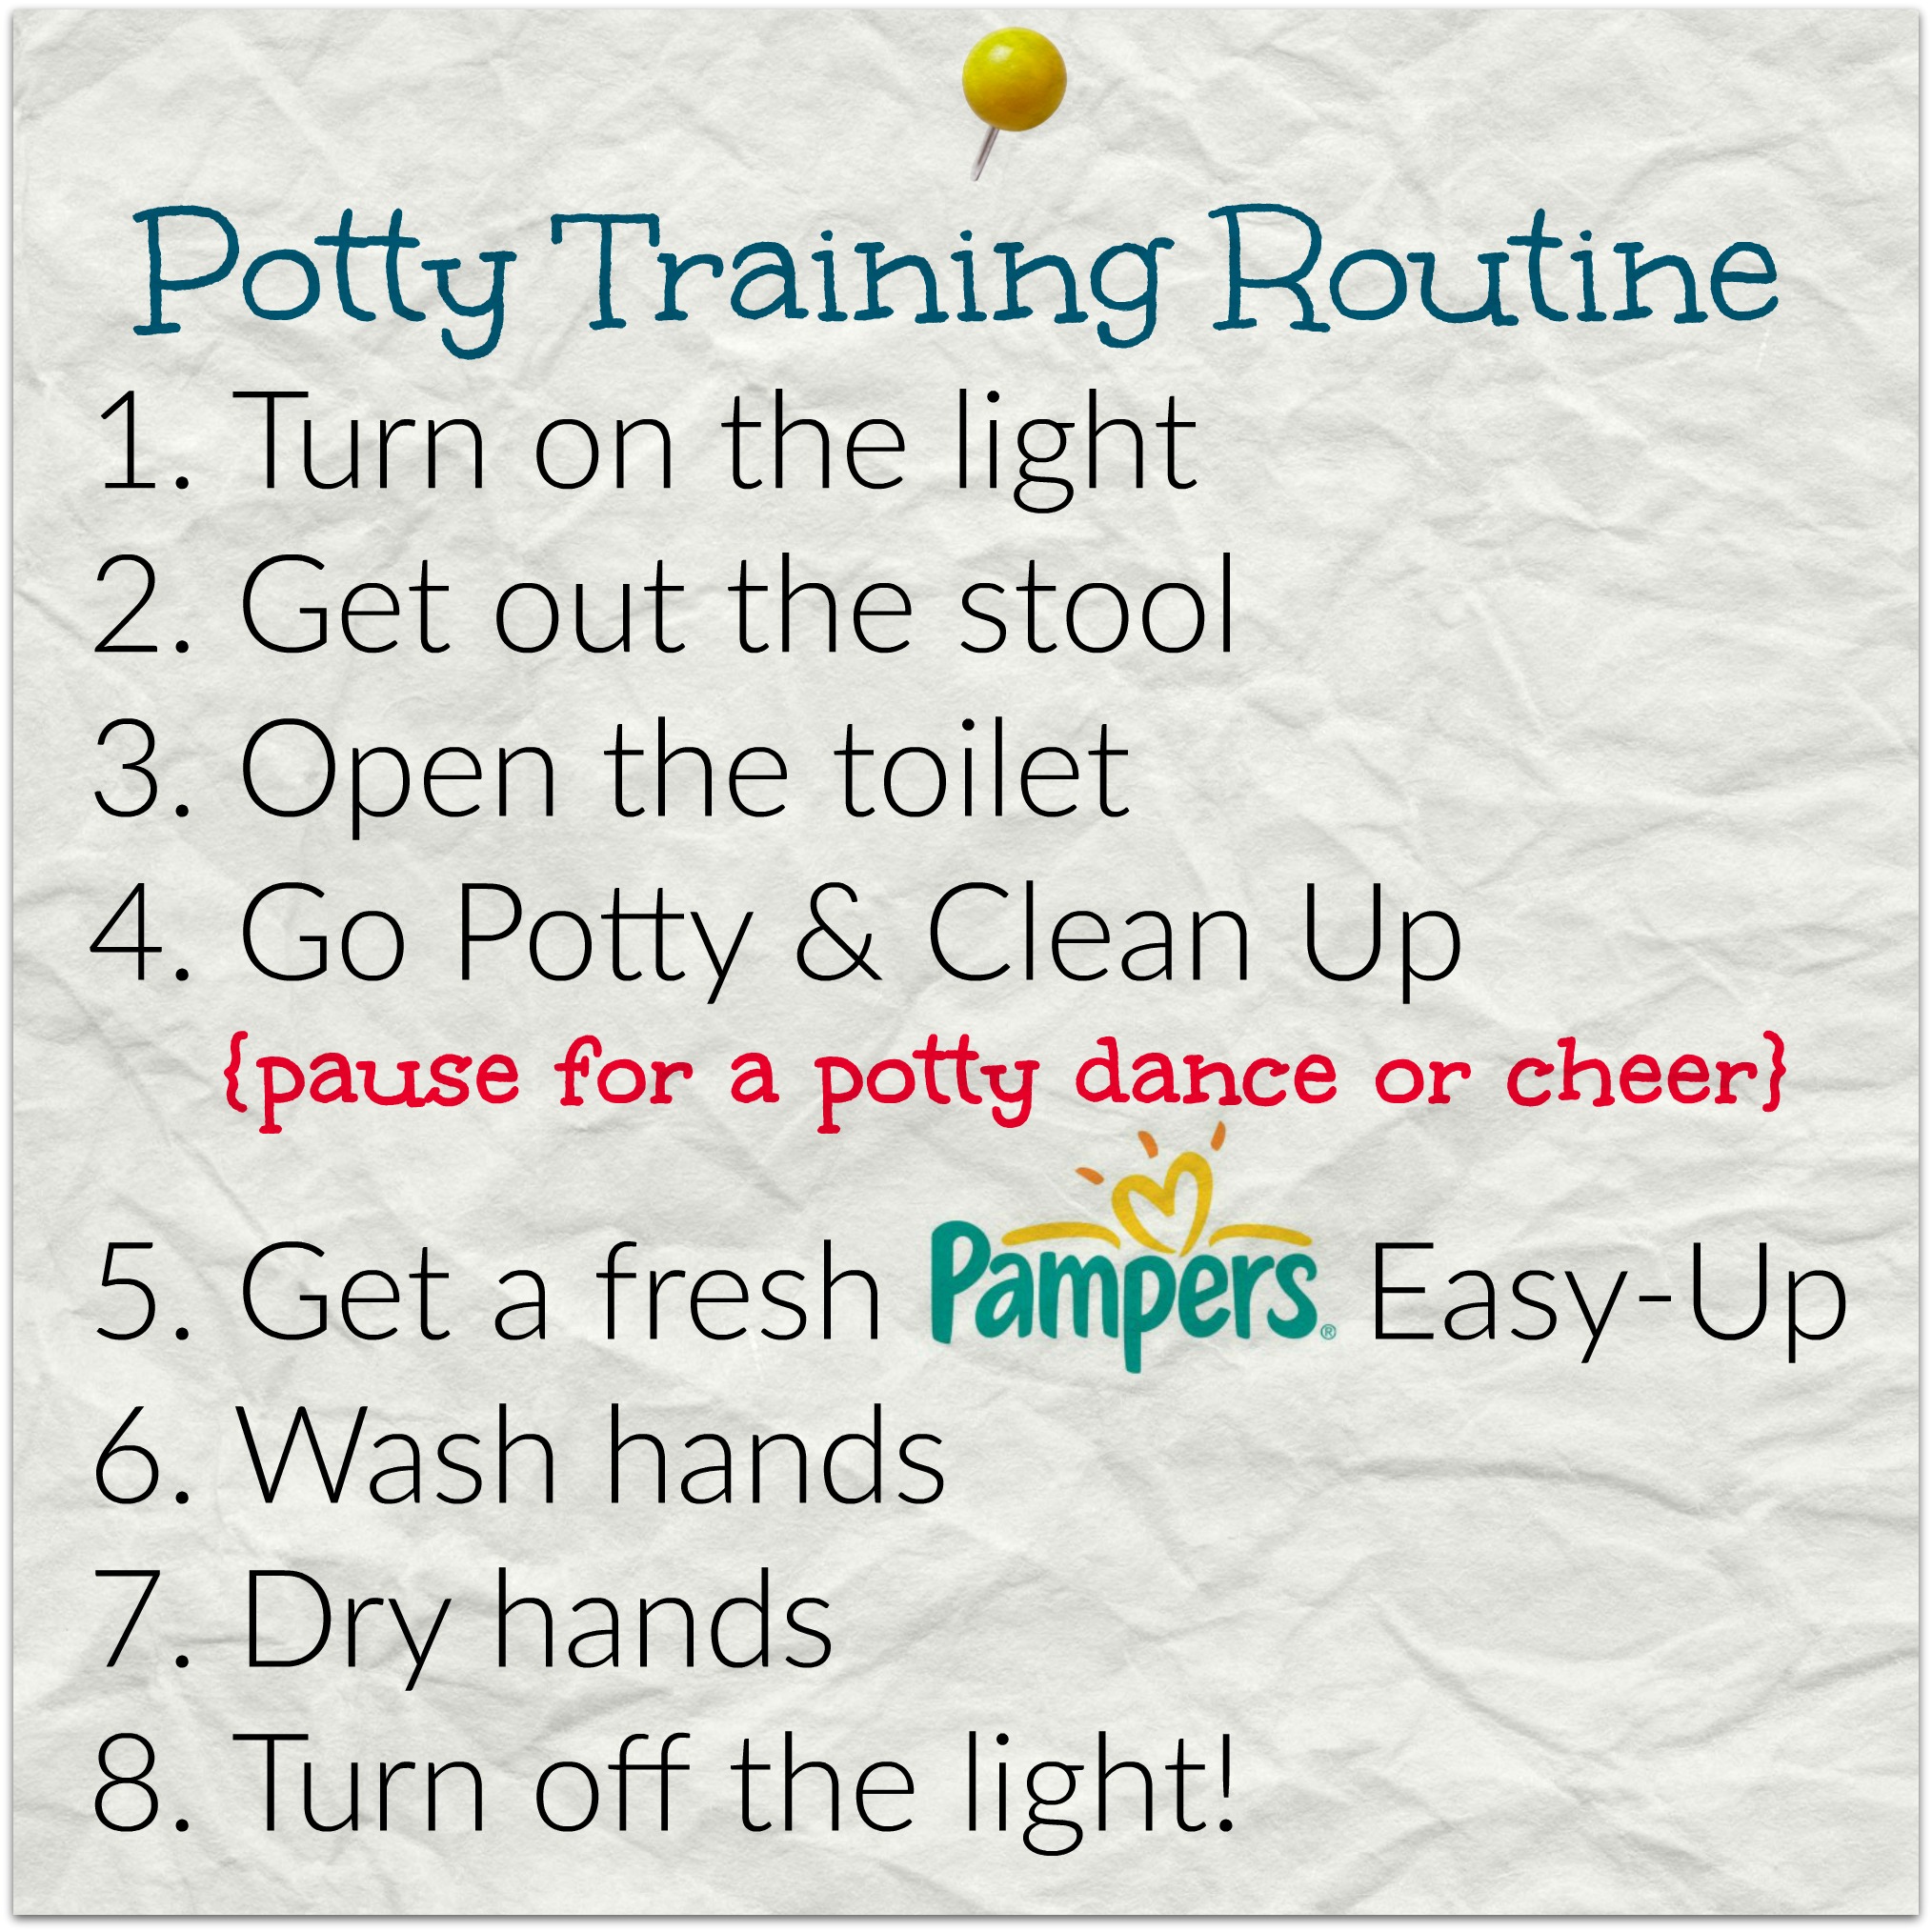 Potty training must-haves!